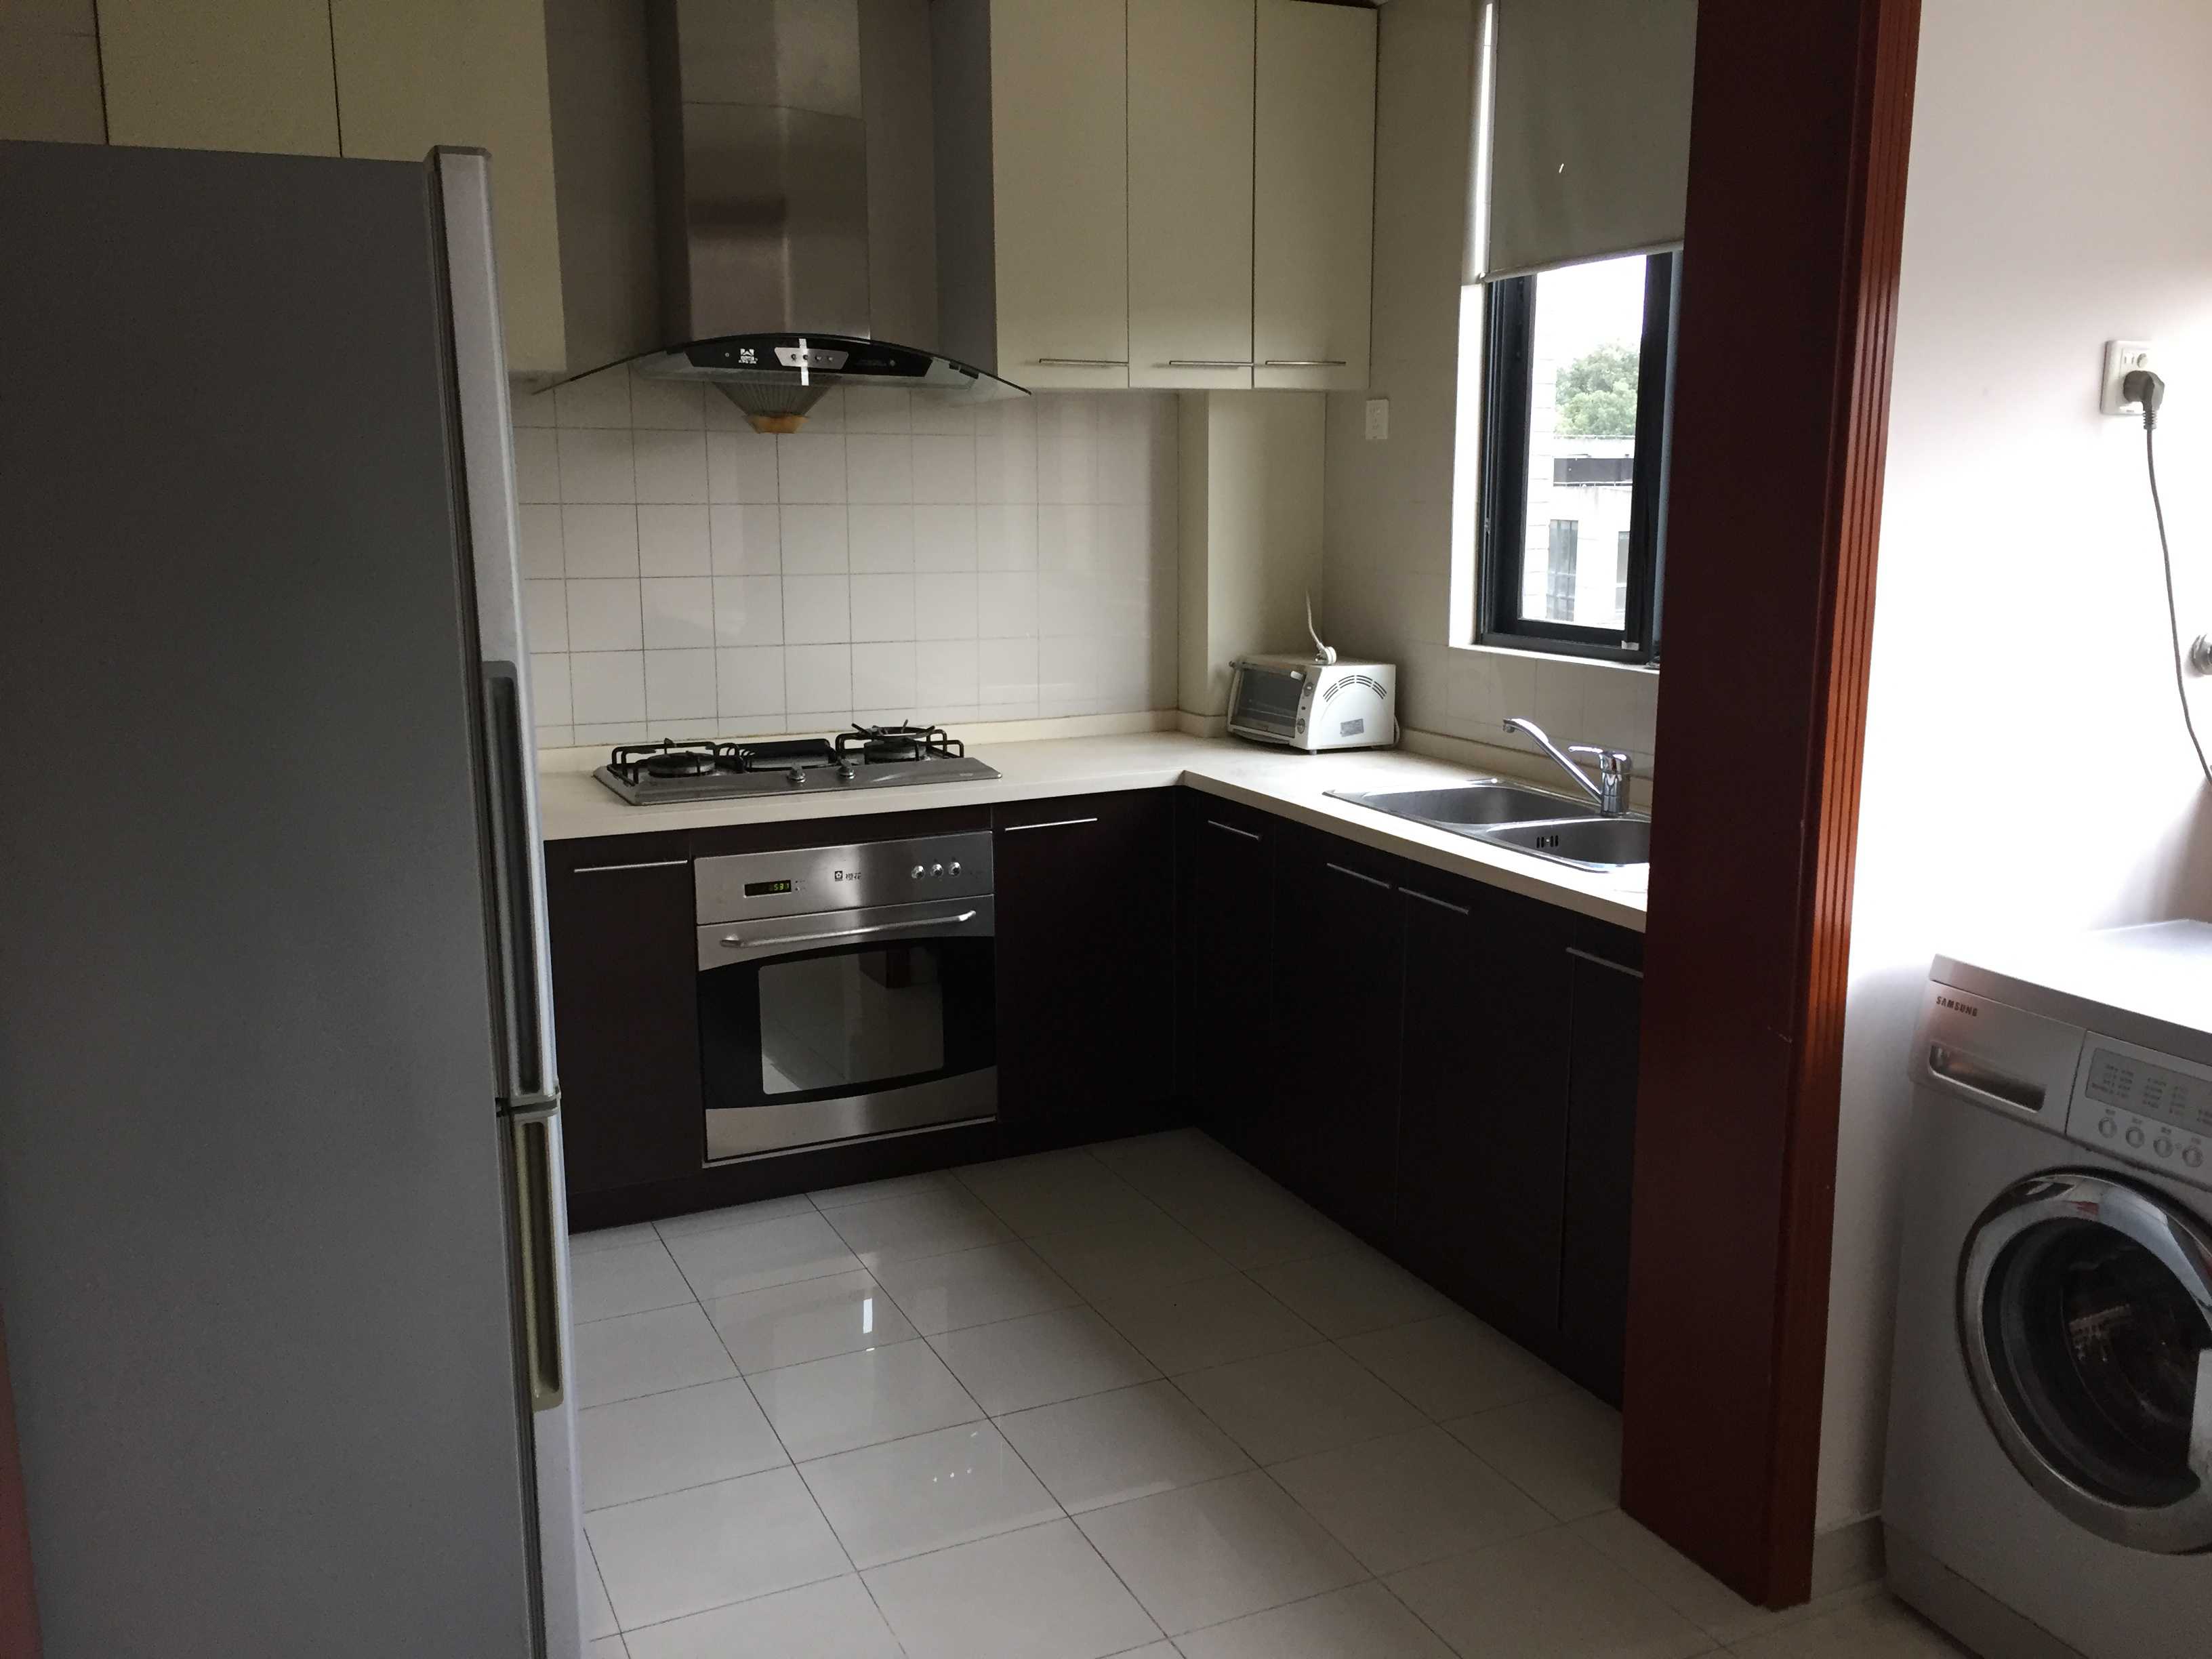 large kitchen Good Price, Bright Spacious Apartment for Rent near Shanghai Zoo